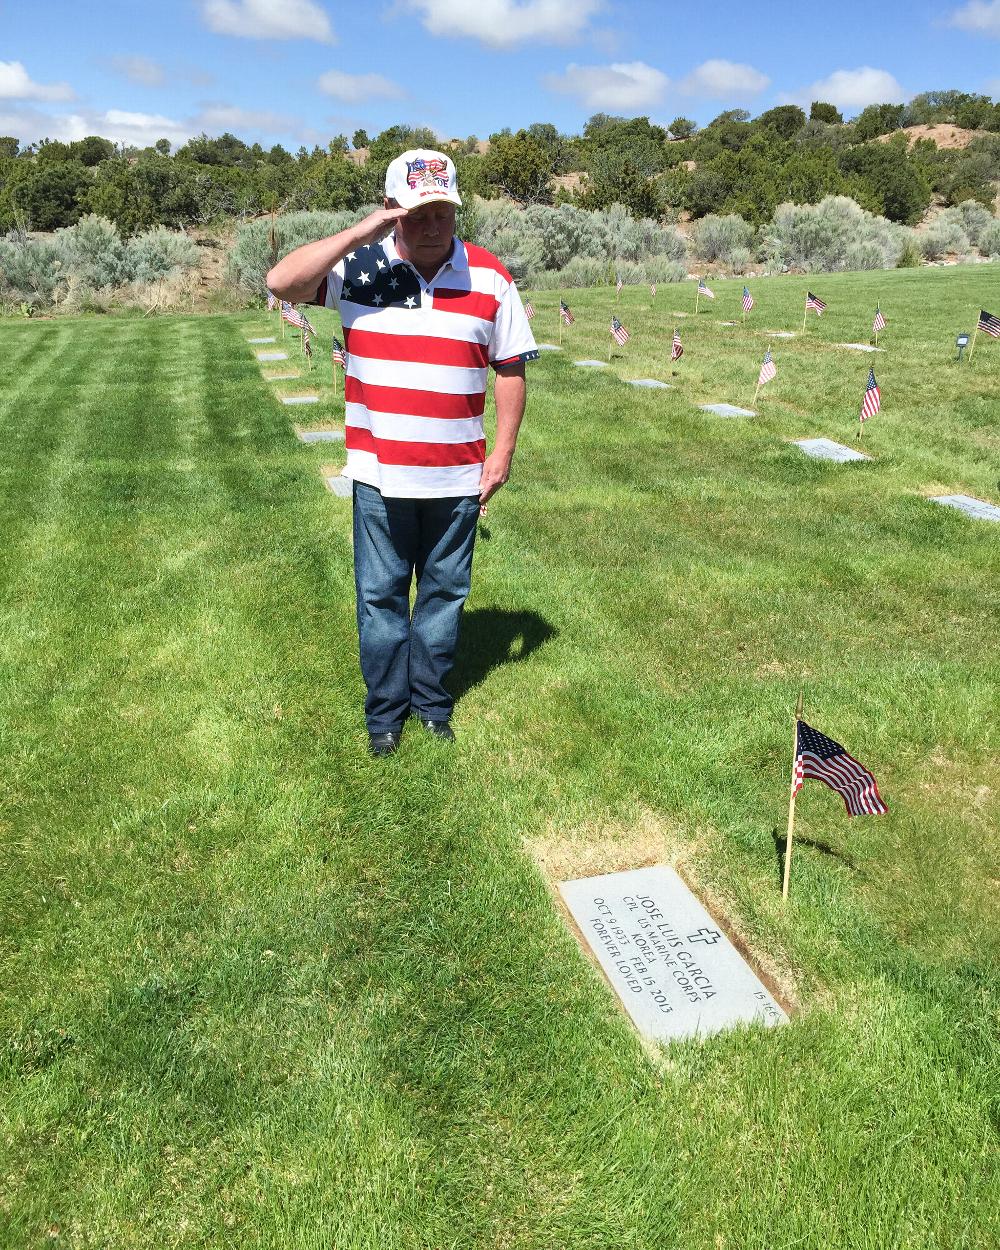 ER Dave Fitzgerald salutes the gravesite of Jose Luis Garcia at the Memorial Day ceremony at Santa Fe National Cemetery. CPL Garcia served in Korea with the Marine Corps. and is one of 53,000 members of our Armed Forces who now lay at rest in our National Cemetery. Lodge 460 was proud to have the opportunity to honor our veterans. CPL Garcia's daughter, Kitty, is a member of our Lodge.